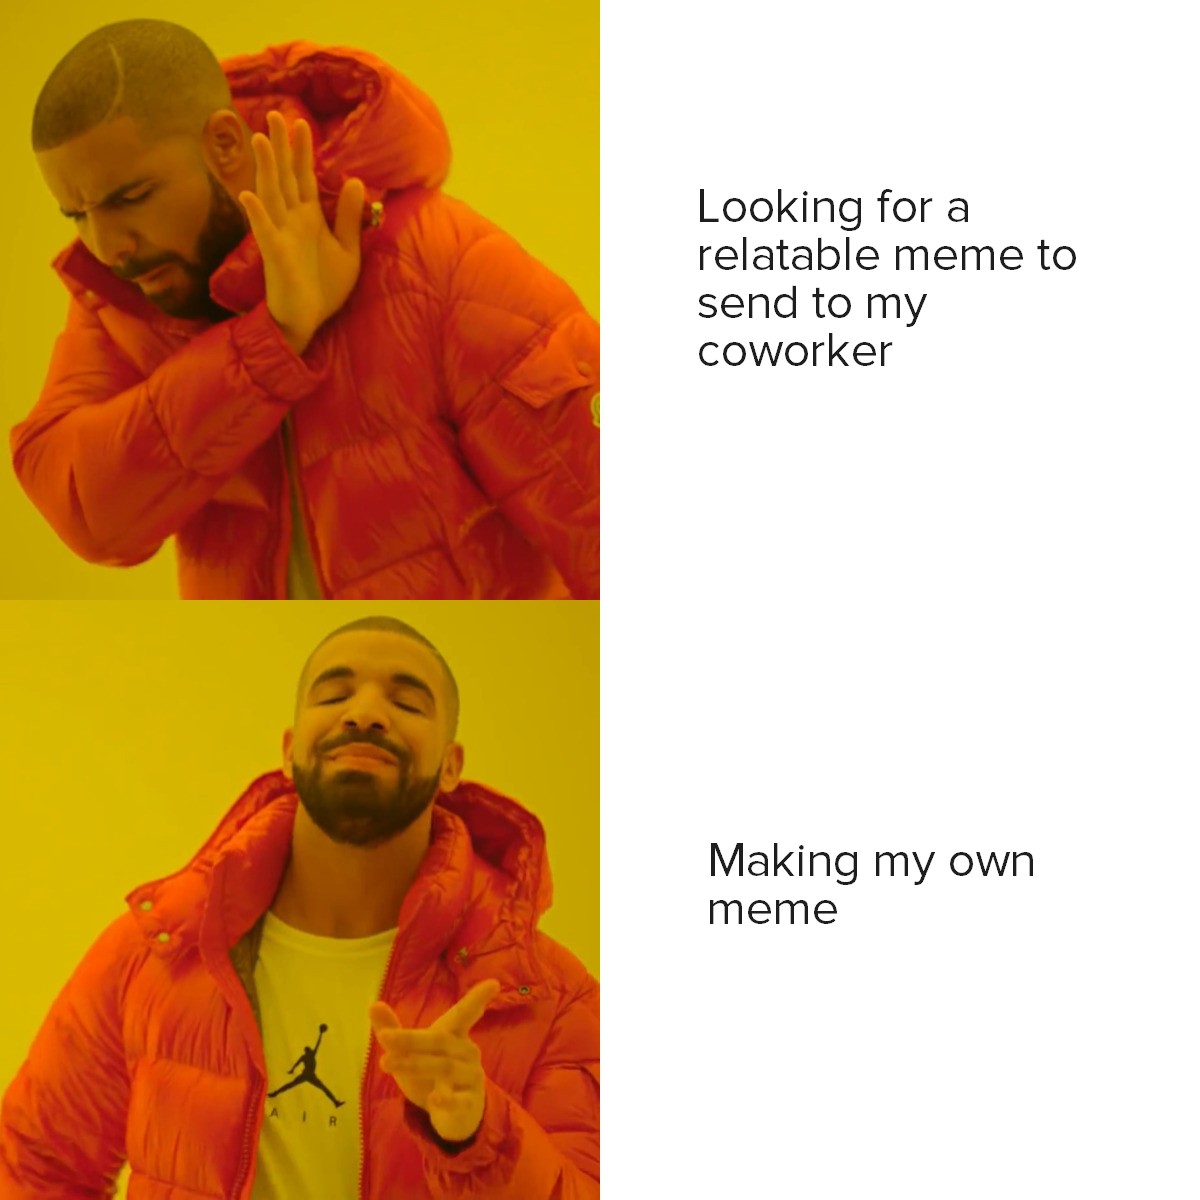 Drake meme of his avoiding the sentence "looking for a relatable meme to send to my coworker" and approving the sentence "making my own meme."